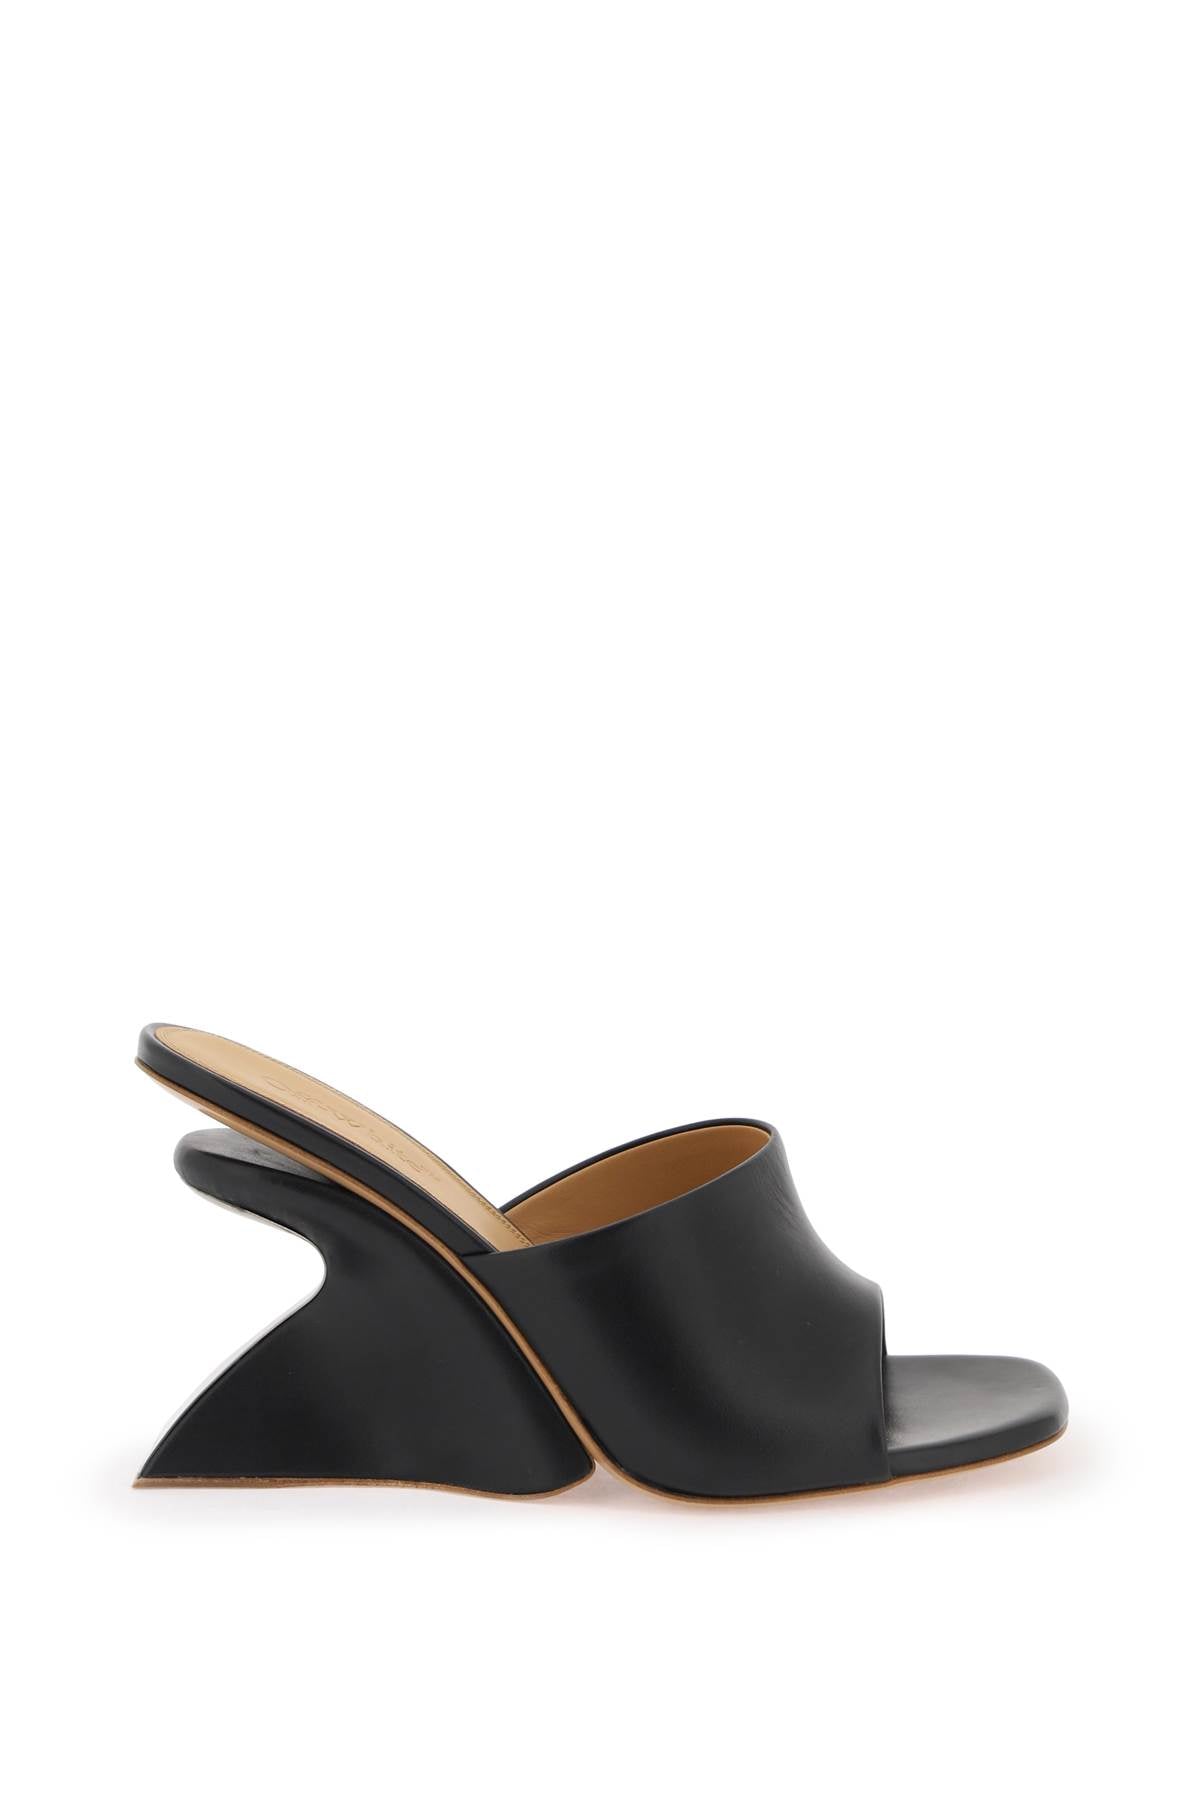 OFF-WHITE Stylish Black Leather Wedge Pumps for Women